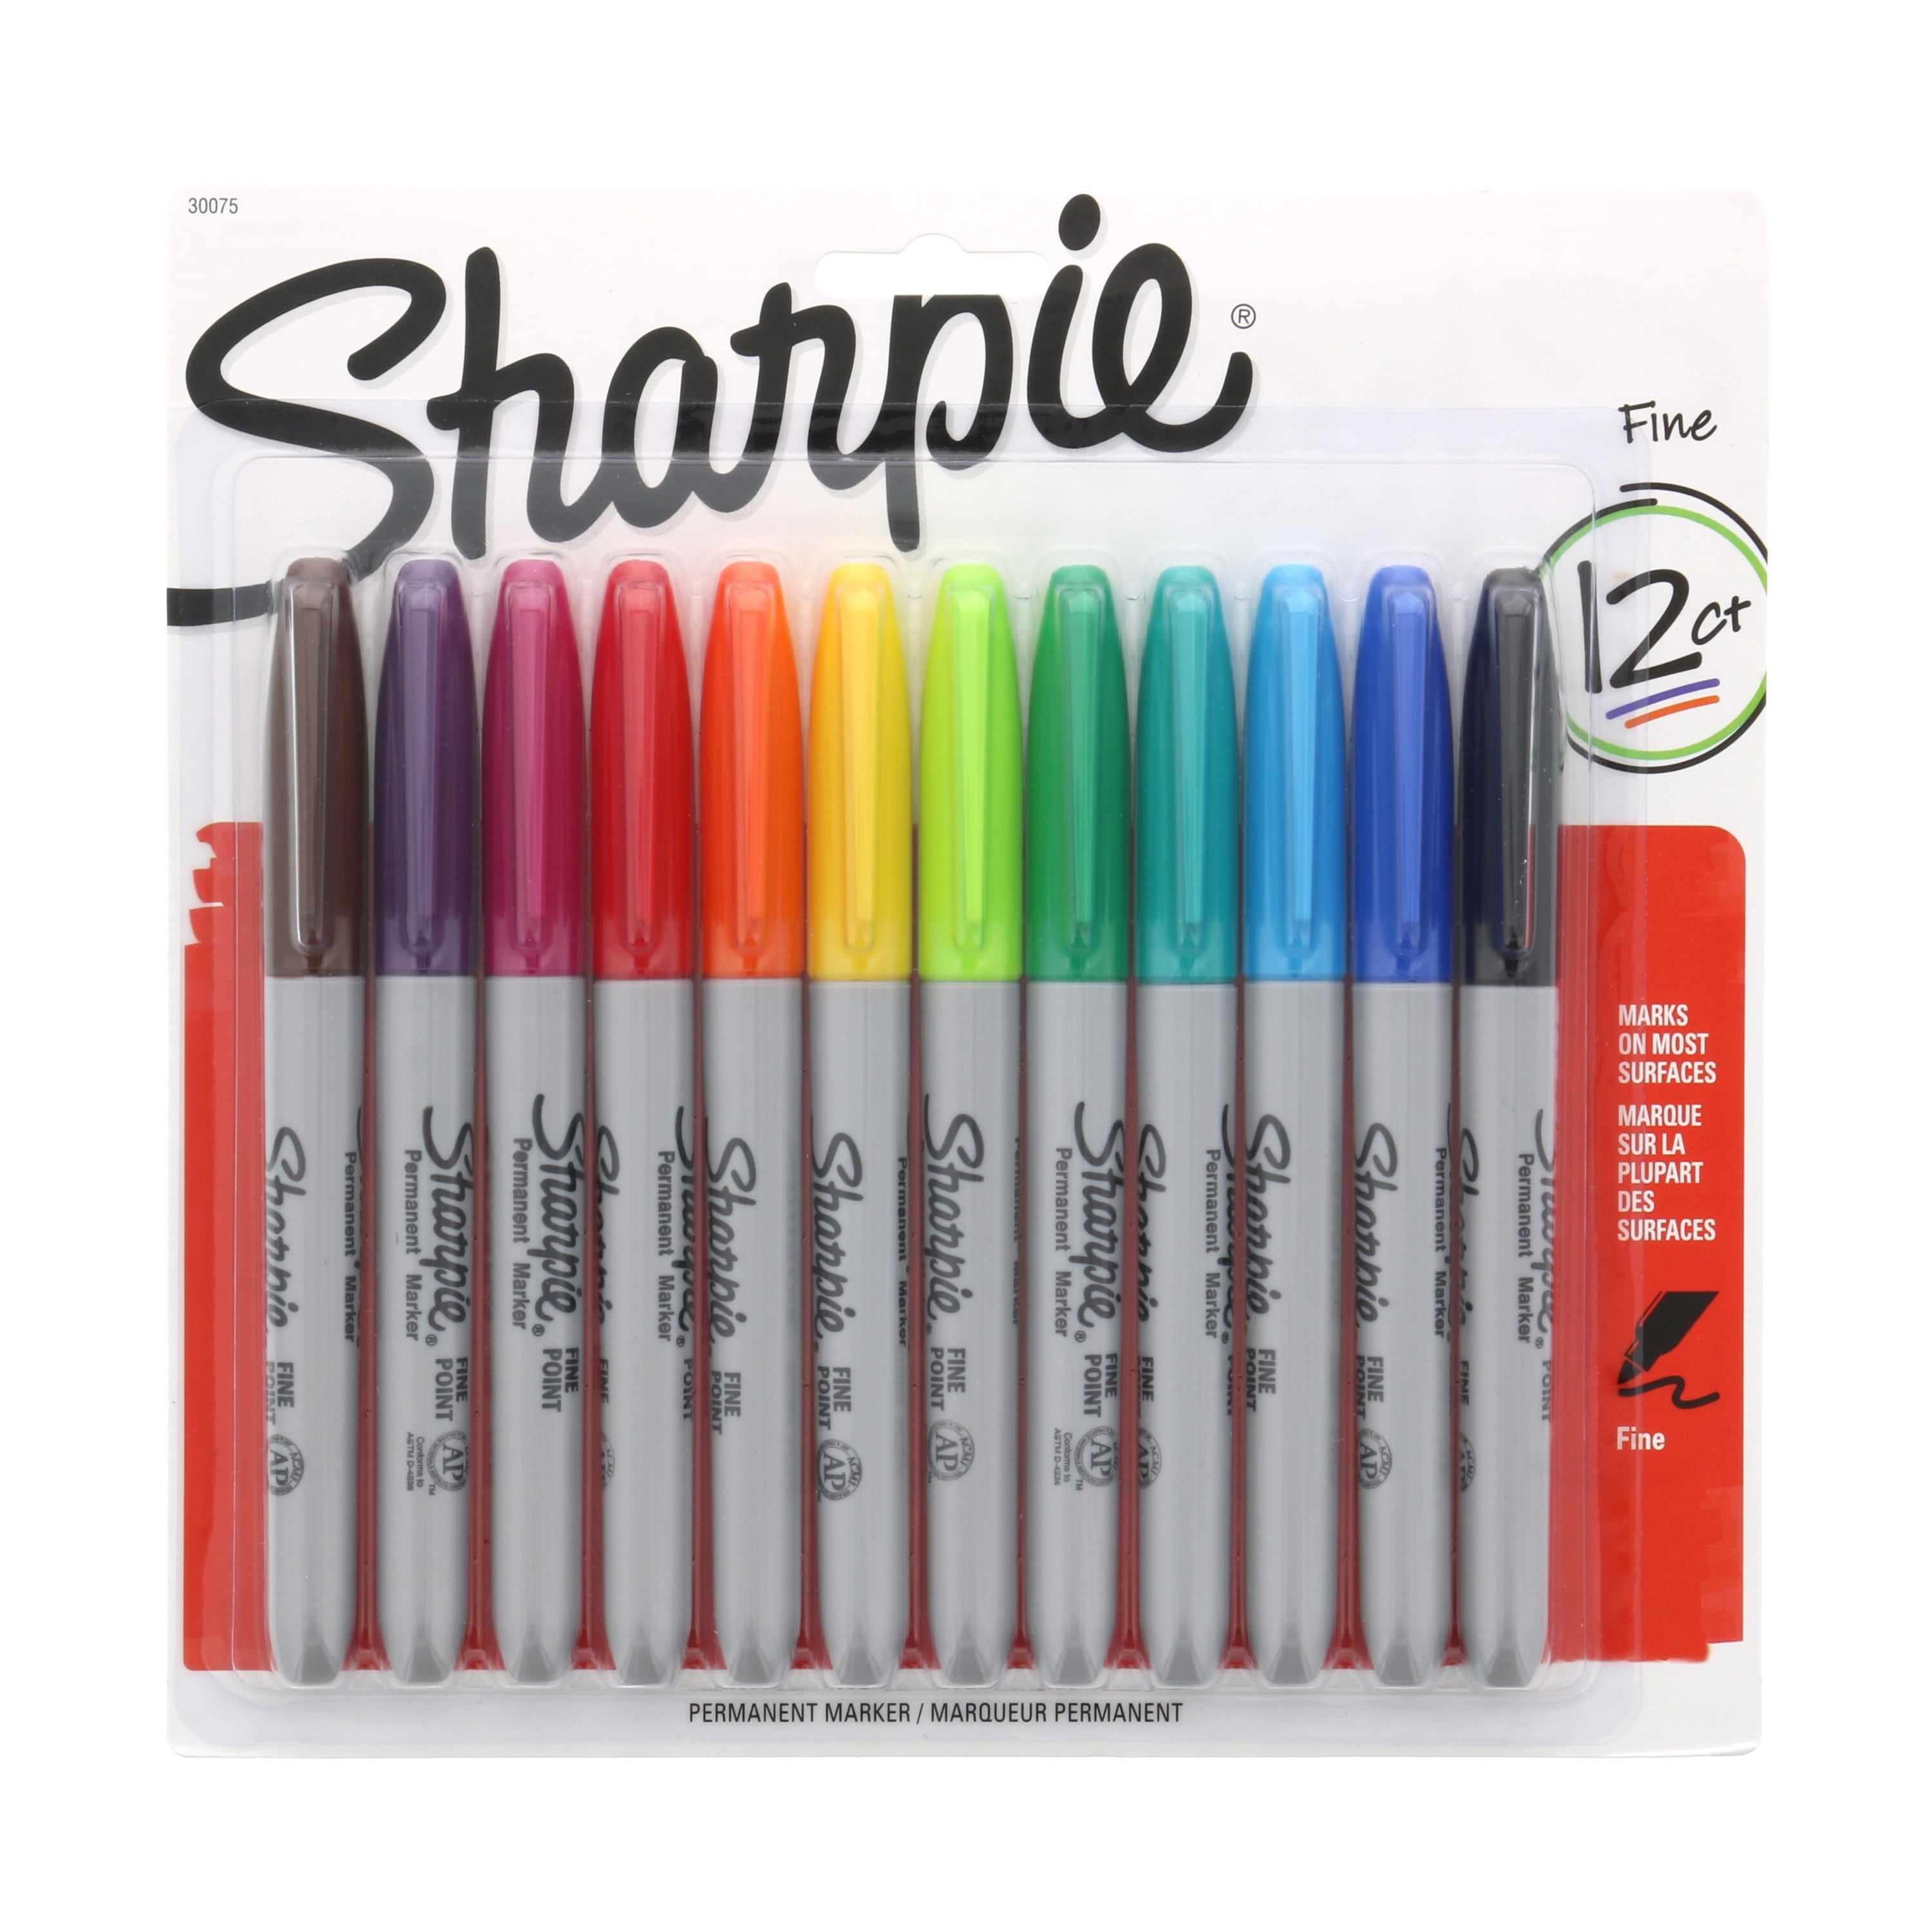 sharpie-permanent-markers-fine-point-assorted-colors-12-count